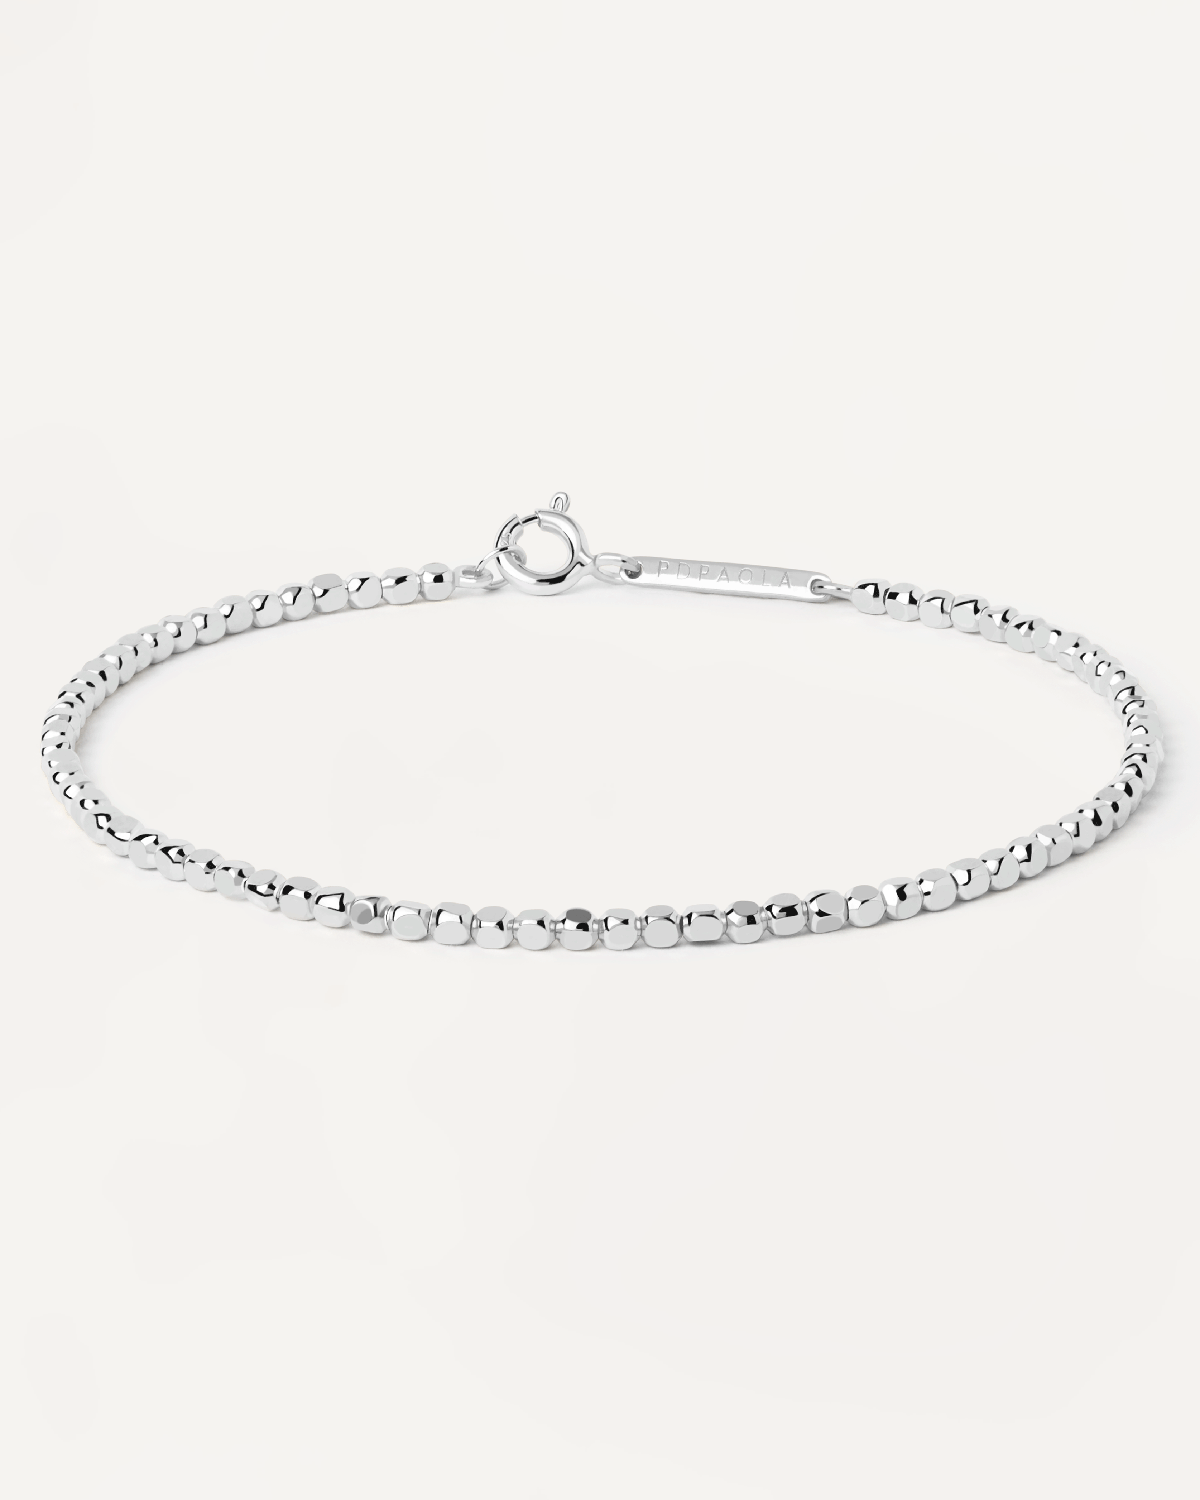 2023 Selection | Marina Silver Chain Bracelet. 925 silver bracelet with asymetric bead links. Get the latest arrival from PDPAOLA. Place your order safely and get this Best Seller. Free Shipping.